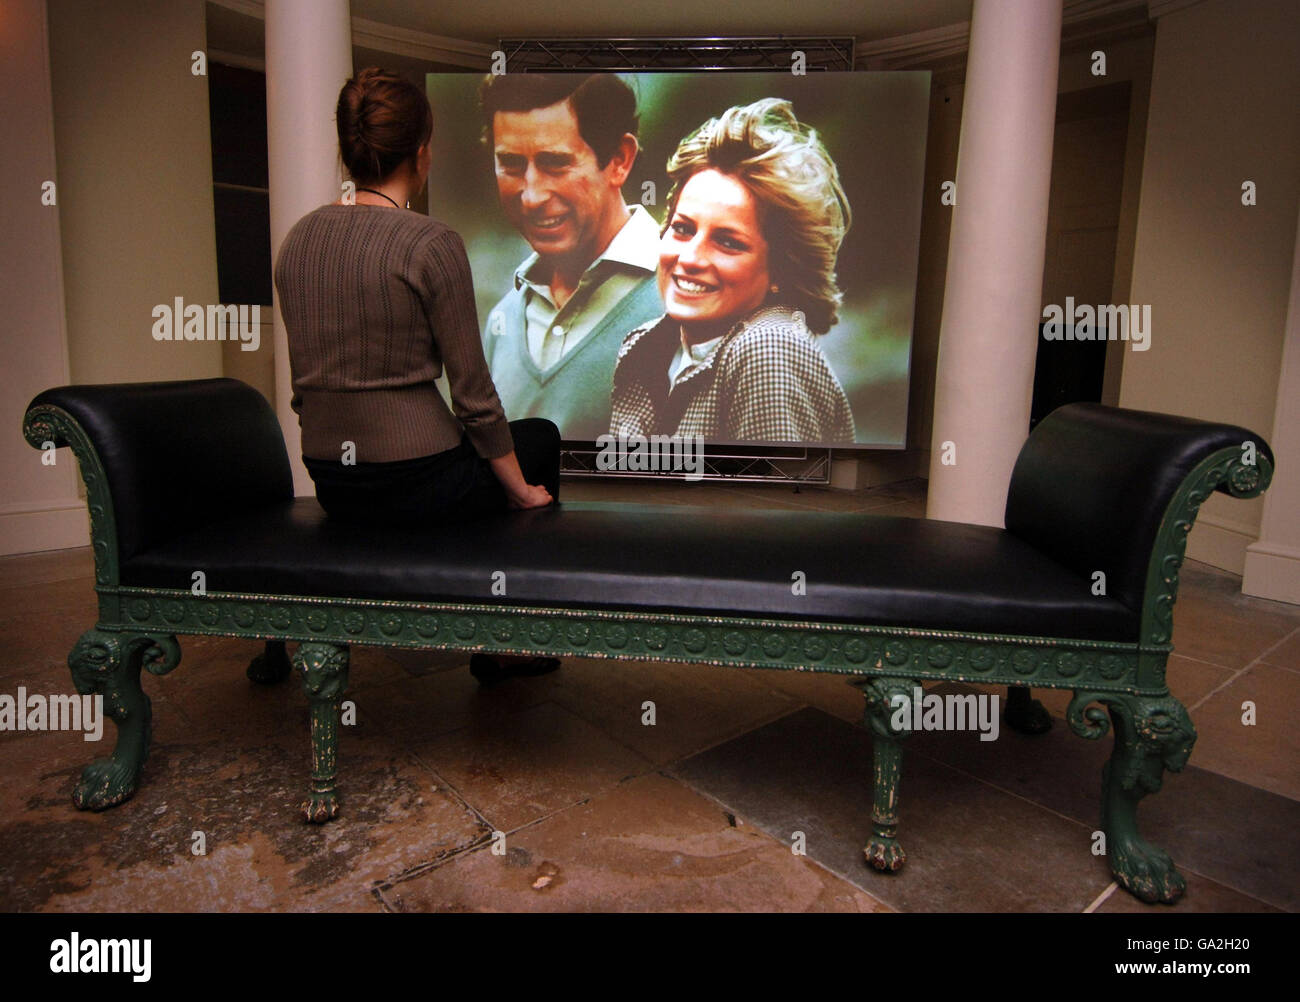 An image of Prince Charles and Princess Diana, the Prince and Princess of Wales, is viewed at her former home Kensington Palace in central London. Stock Photo